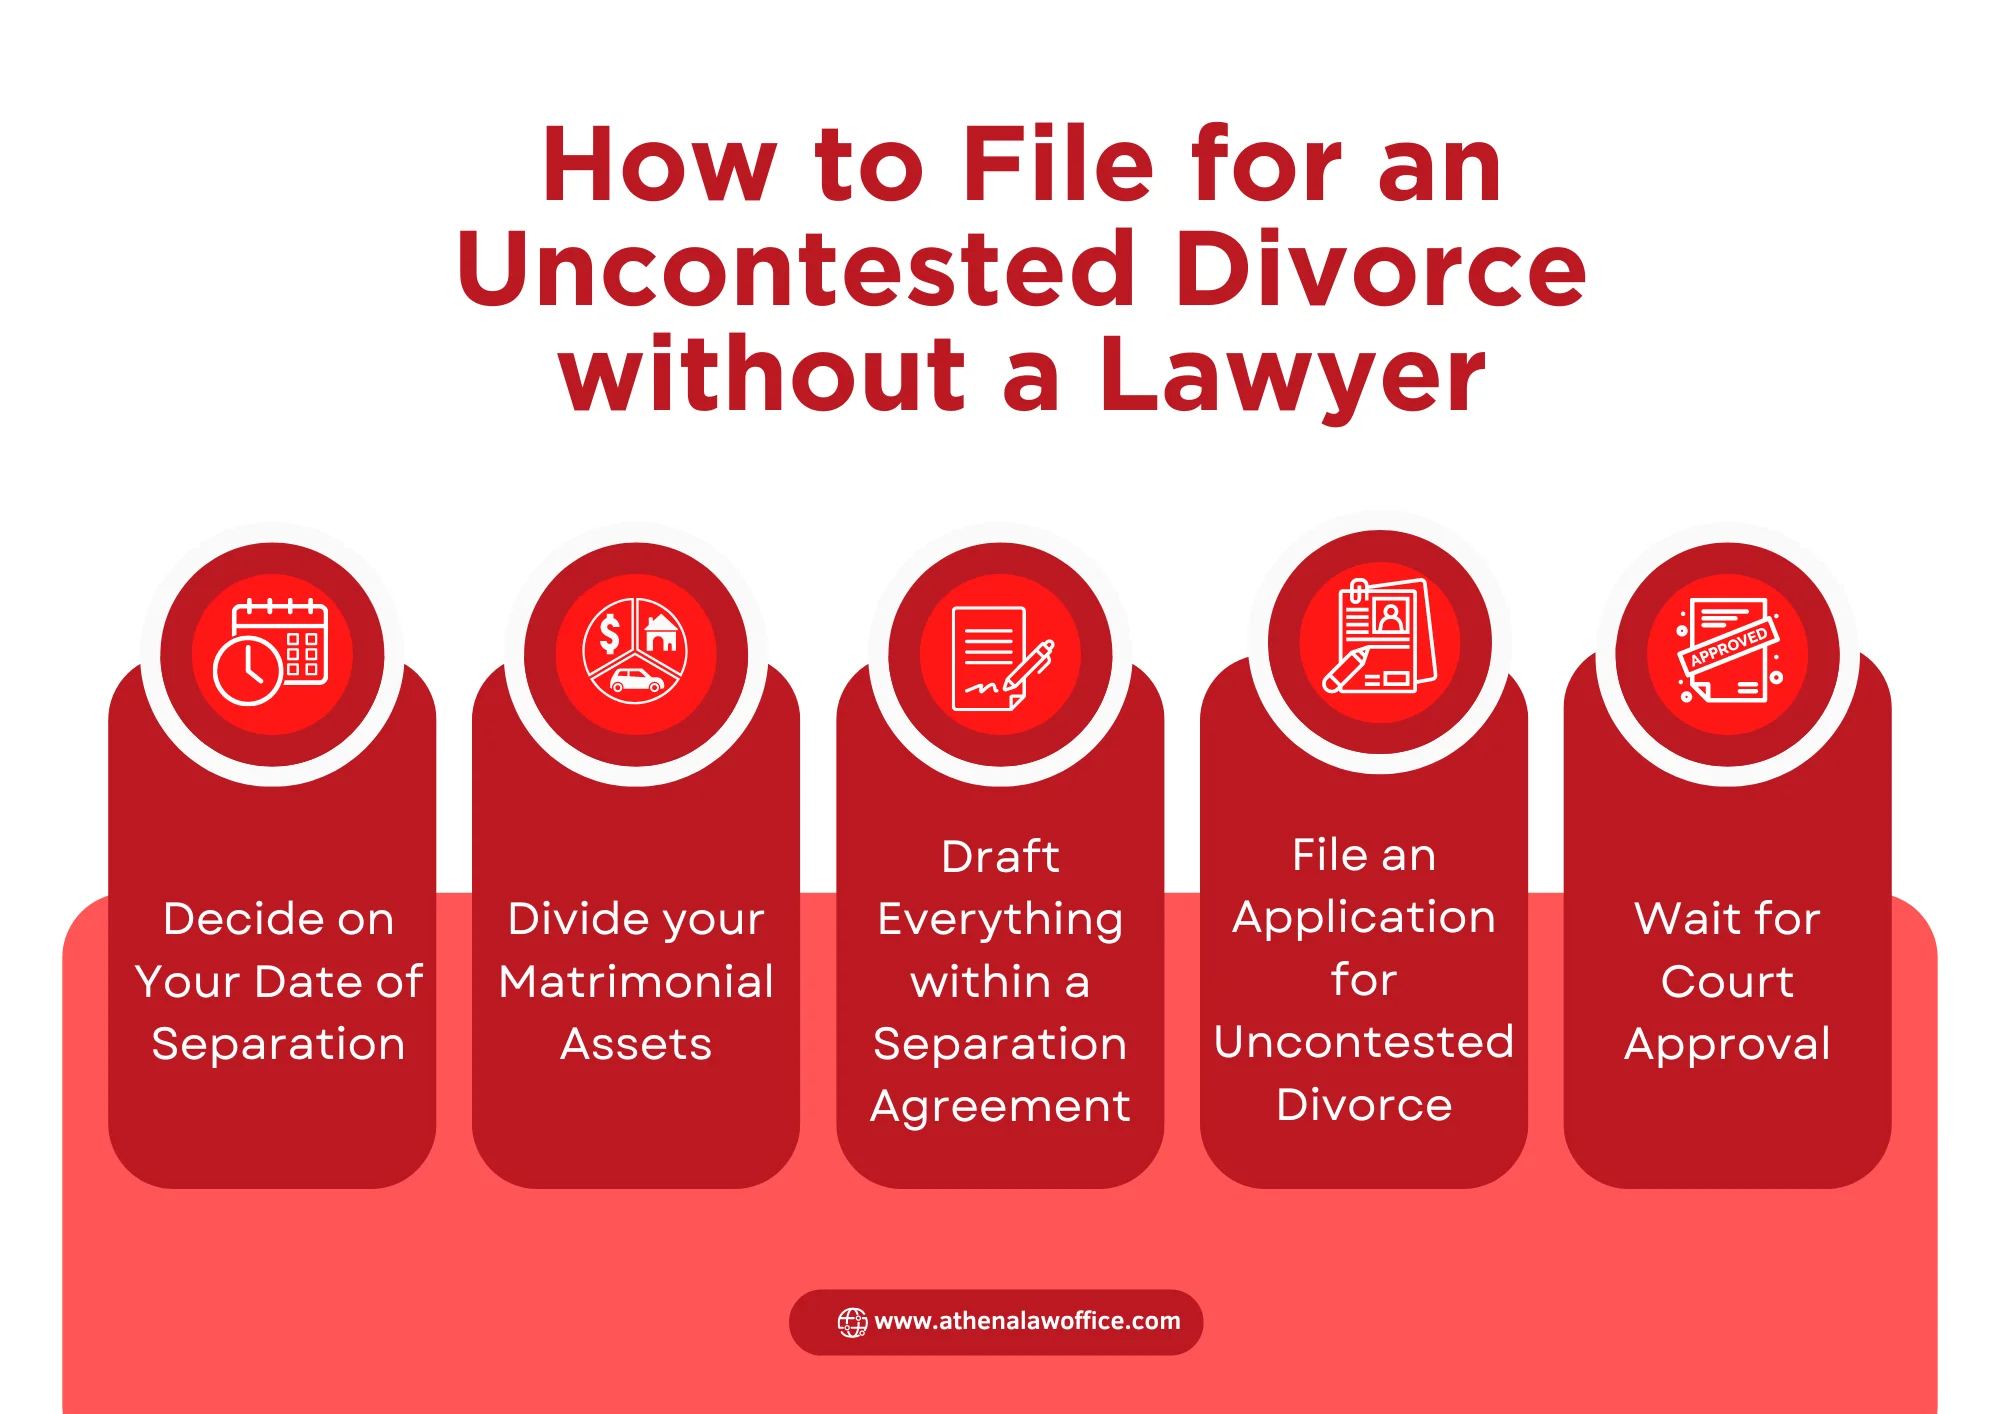 An infographic on how to file for an uncontested divorce in Ontario